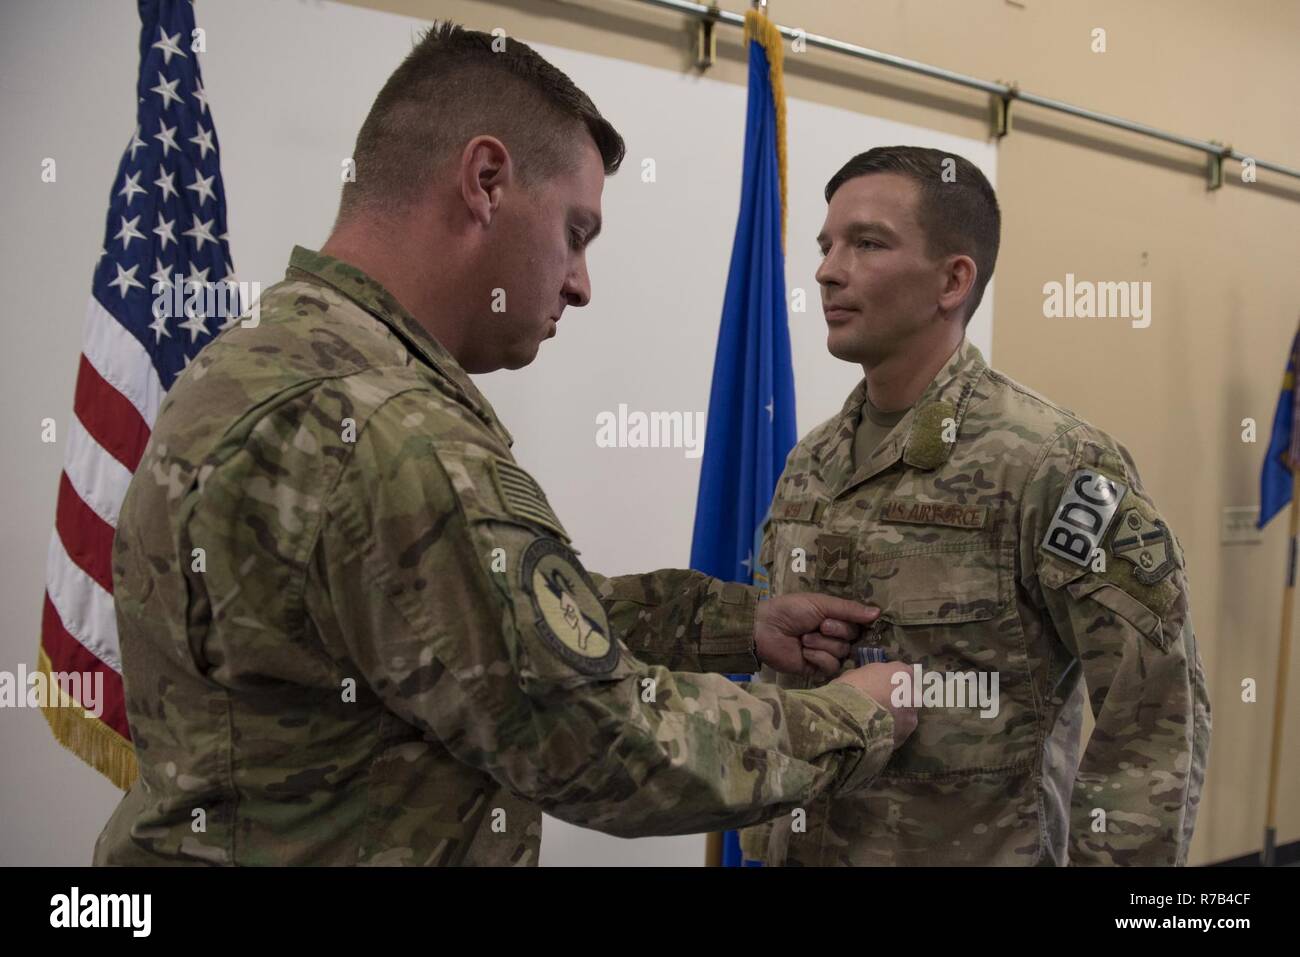 Maj. Michael Warren, 824th Base Defense Squadron commander, pins an achievement medal on Staff Sgt. David Green, 824th BDS fireteam leader, April 10, 2017, at Moody Air Force Base, Ga. Green received the medal for his act of heroism when he helped a trapped victim during an off-base vehicle incident. Stock Photo